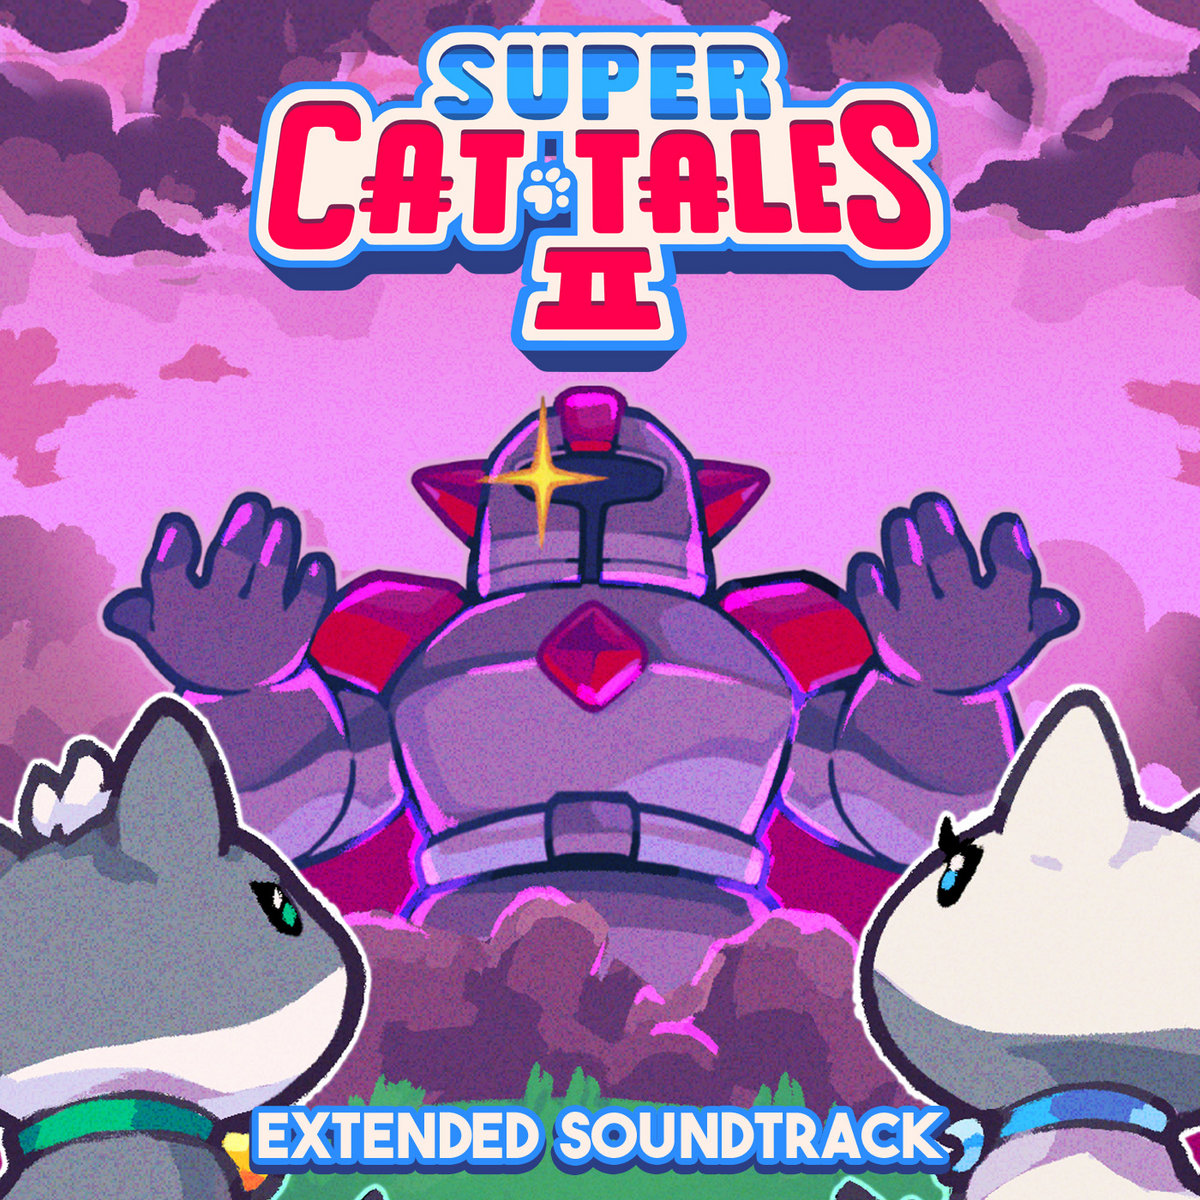 super-cat-tales-2-extended-soundtrack-android-2021-mp3-download-super-cat-tales-2-extended